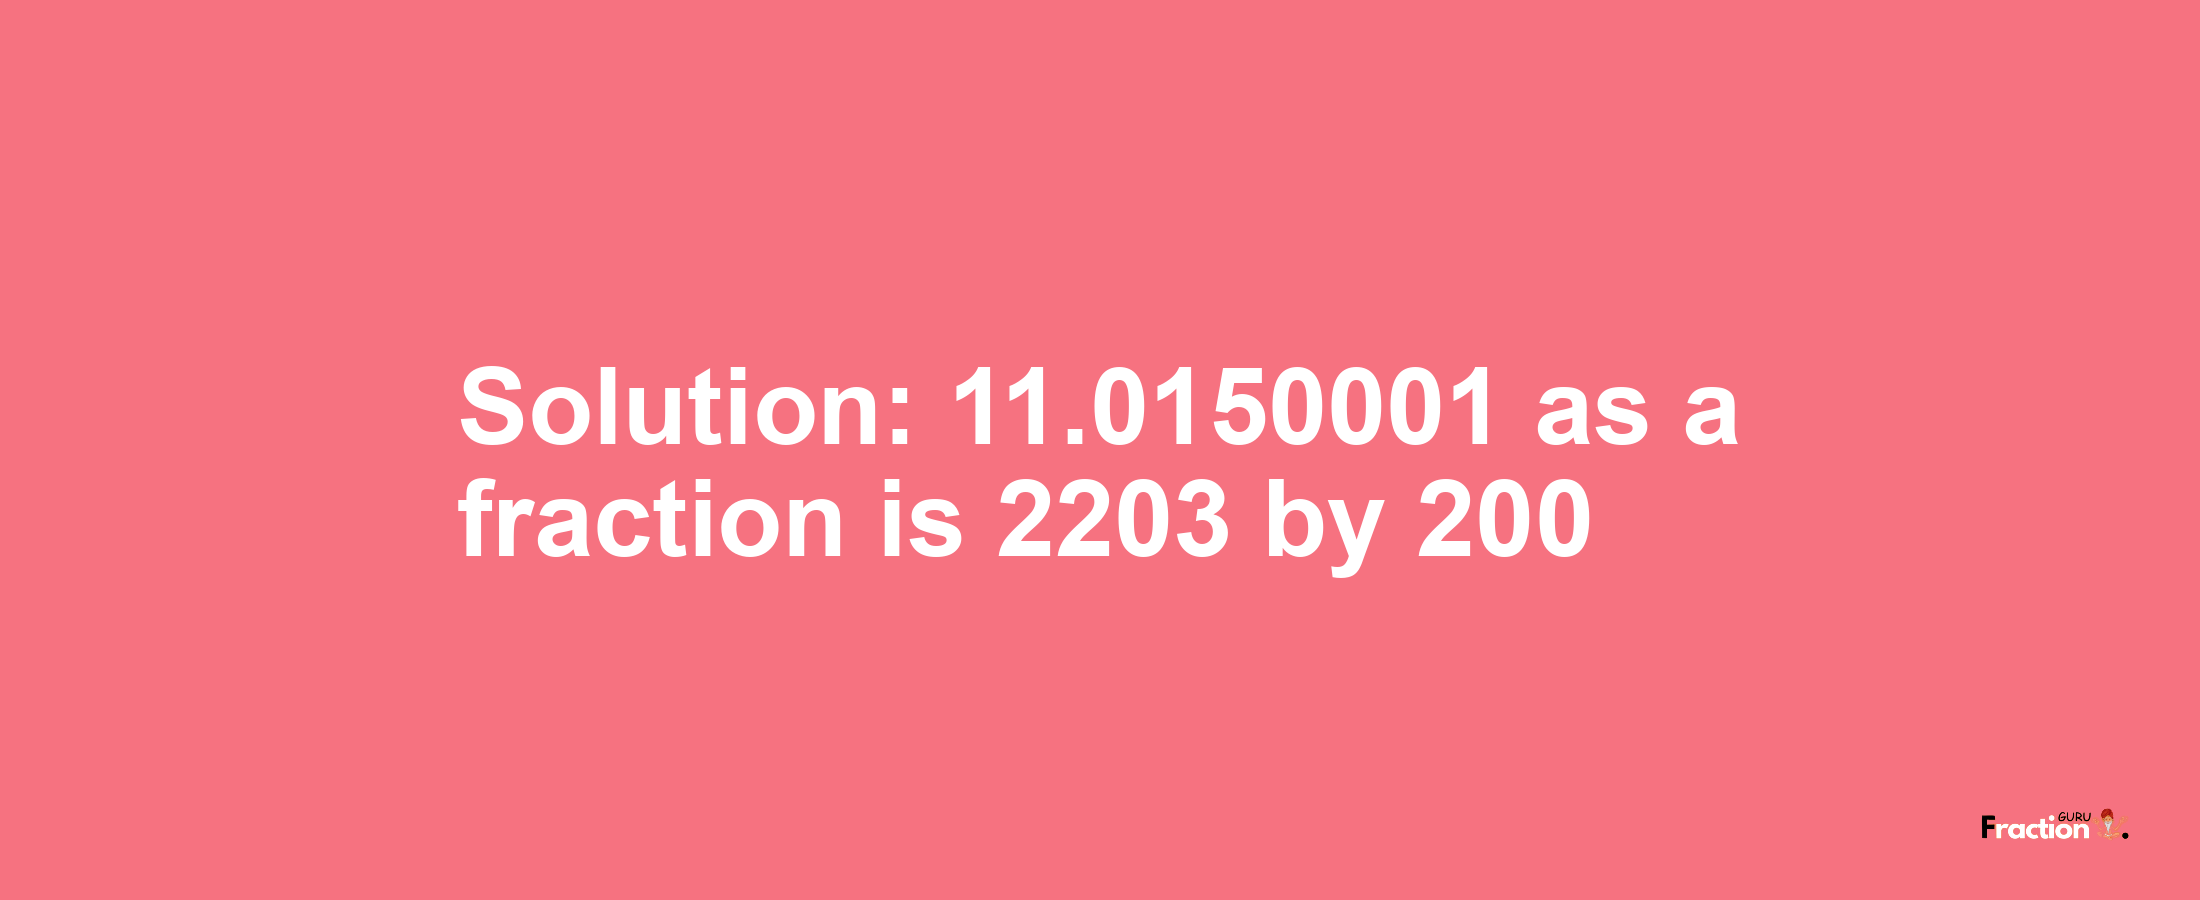 Solution:11.0150001 as a fraction is 2203/200